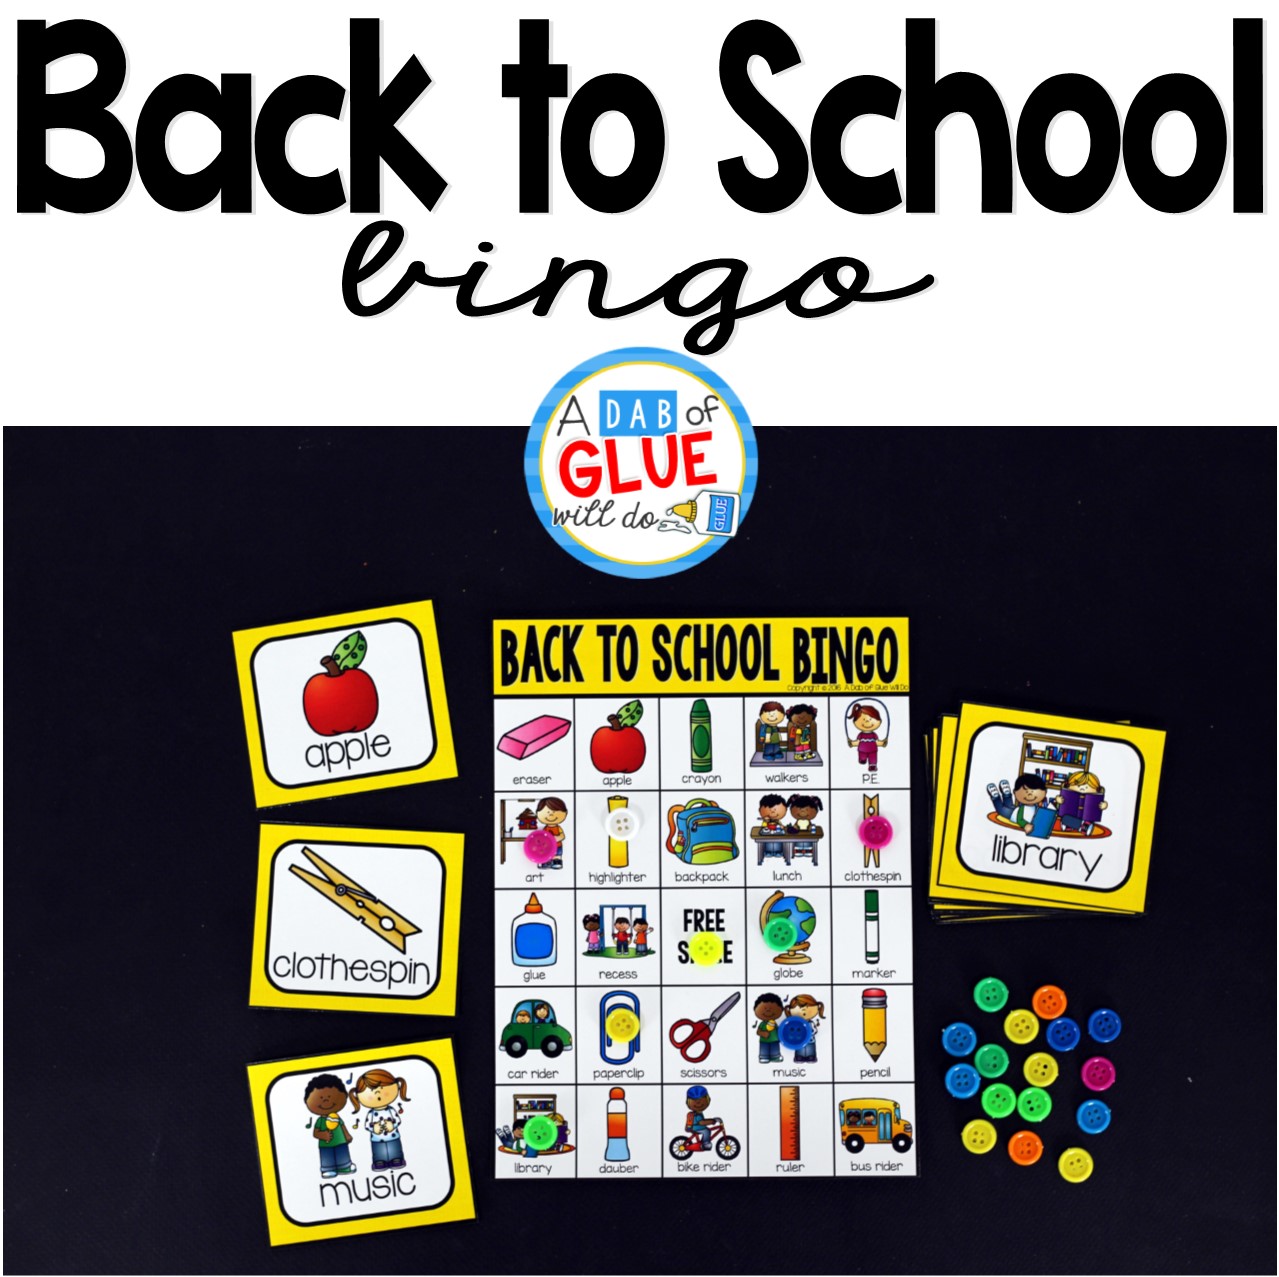 Play Bingo with your elementary age students for a fun back to school themed game! Perfect for large groups in your classroom or small review groups. Add this to your beginning of the year lesson plans with 30 unique Back to School Bingo boards!  Teaching cards are also included in this fun game for young children! Black and white options available to save your color ink.